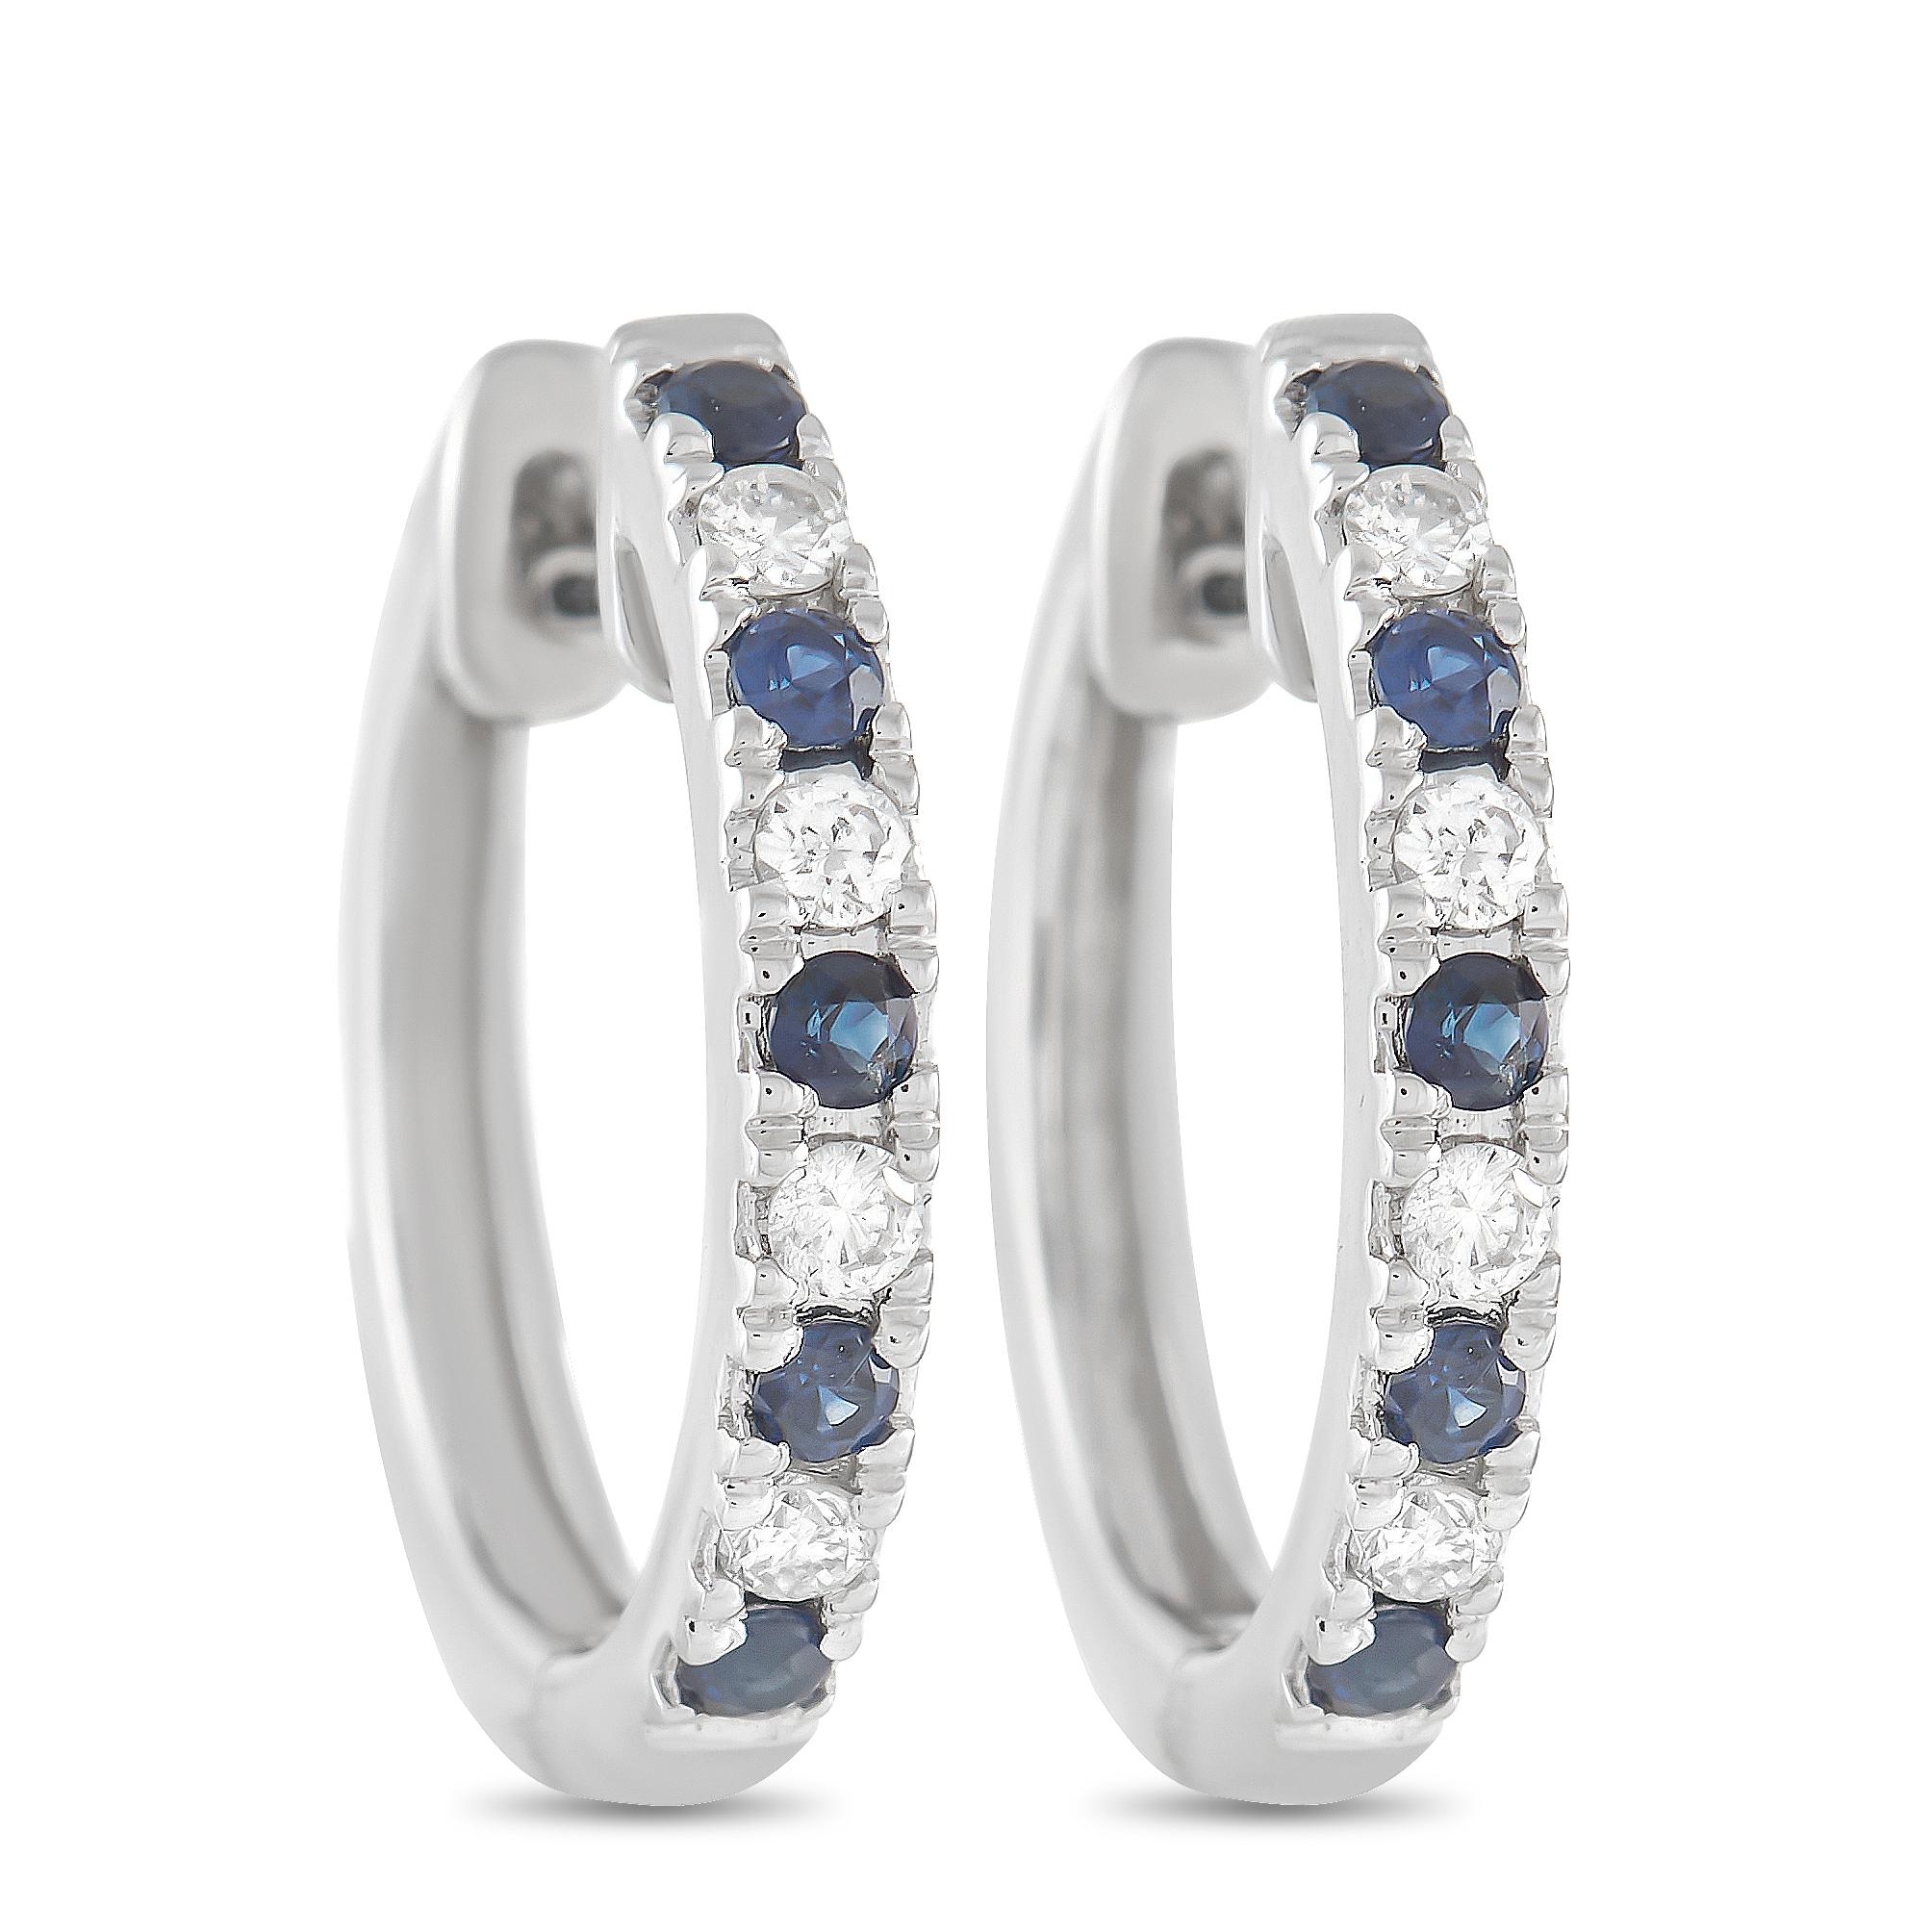 LB Exclusive 14K White Gold 0.11 Ct Diamond and Sapphire Hoop Earrings In New Condition For Sale In Southampton, PA